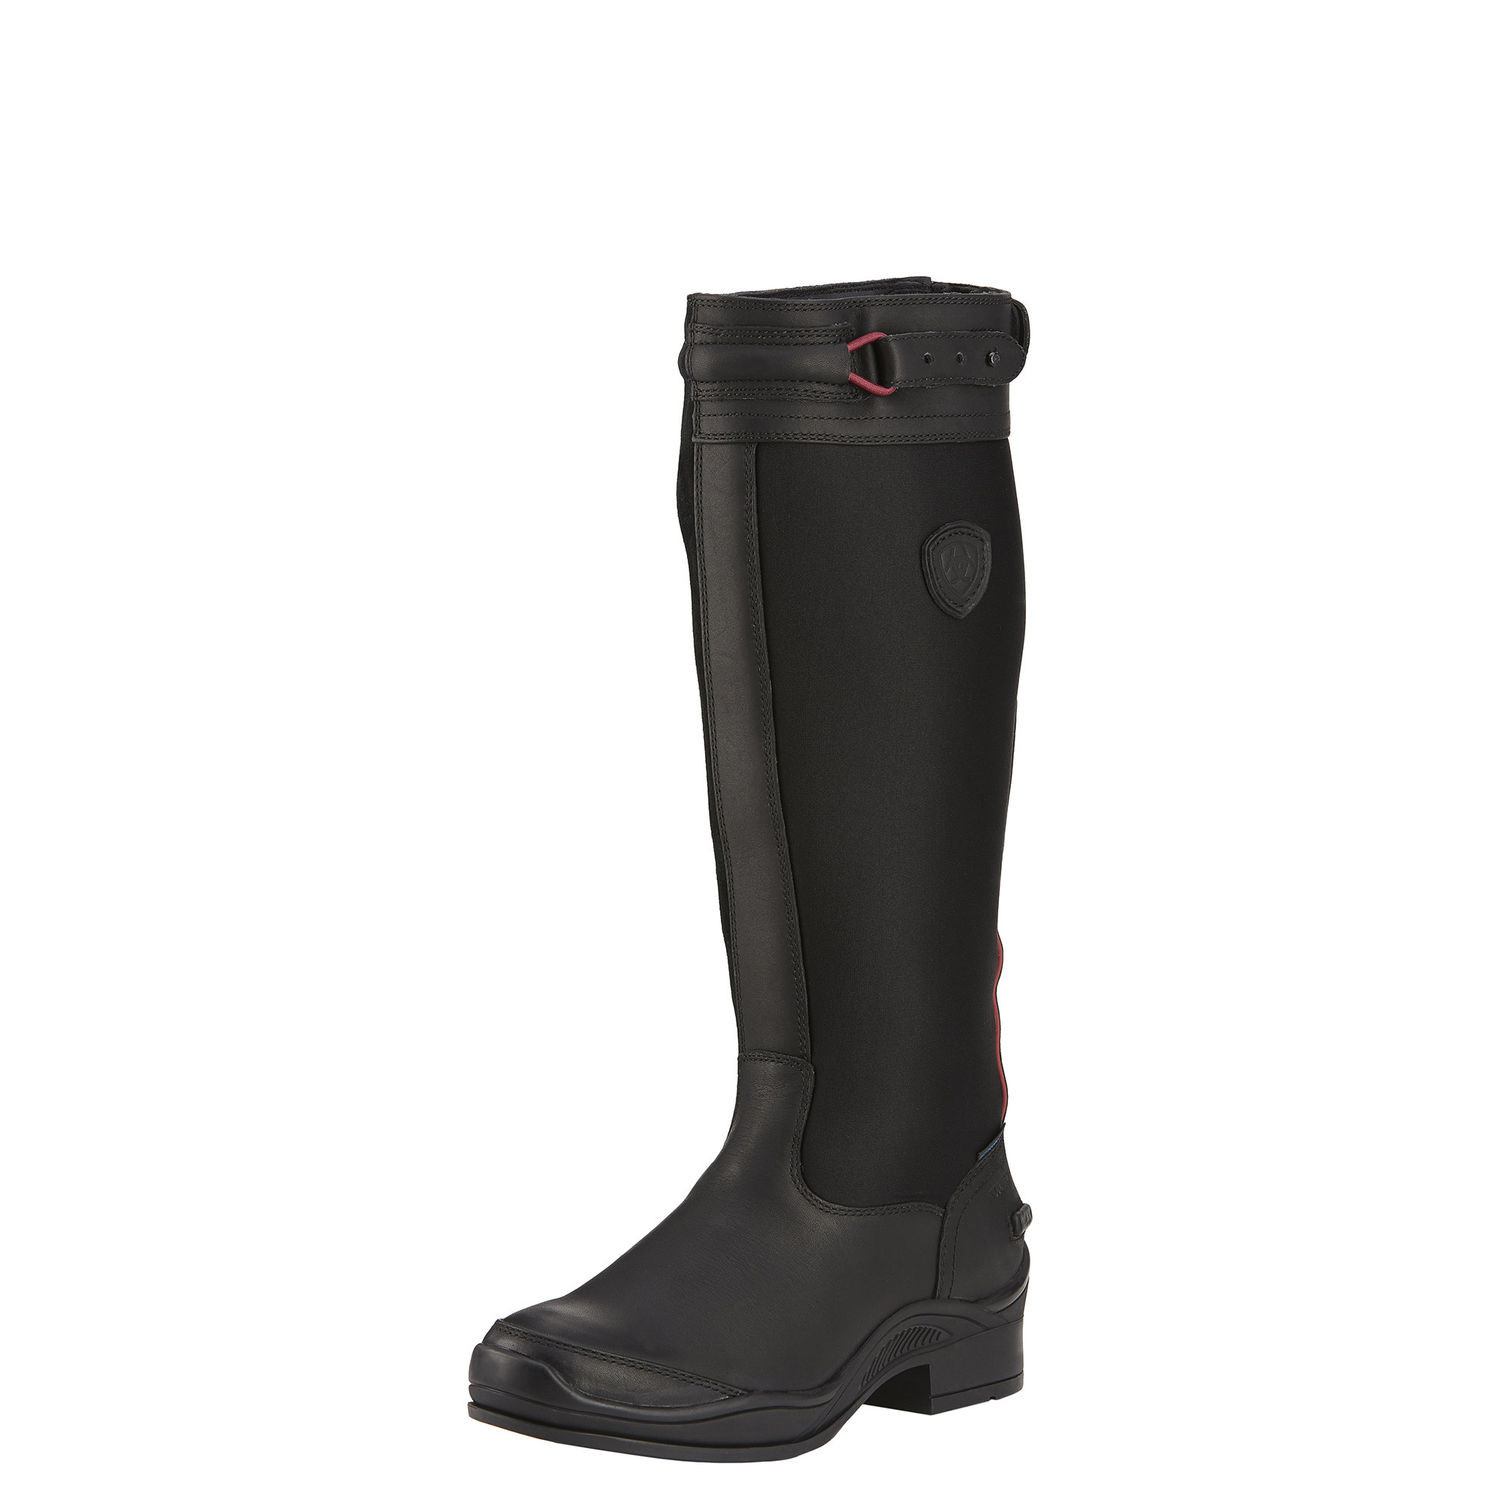 Bottes isolées Extreme Tall H2O